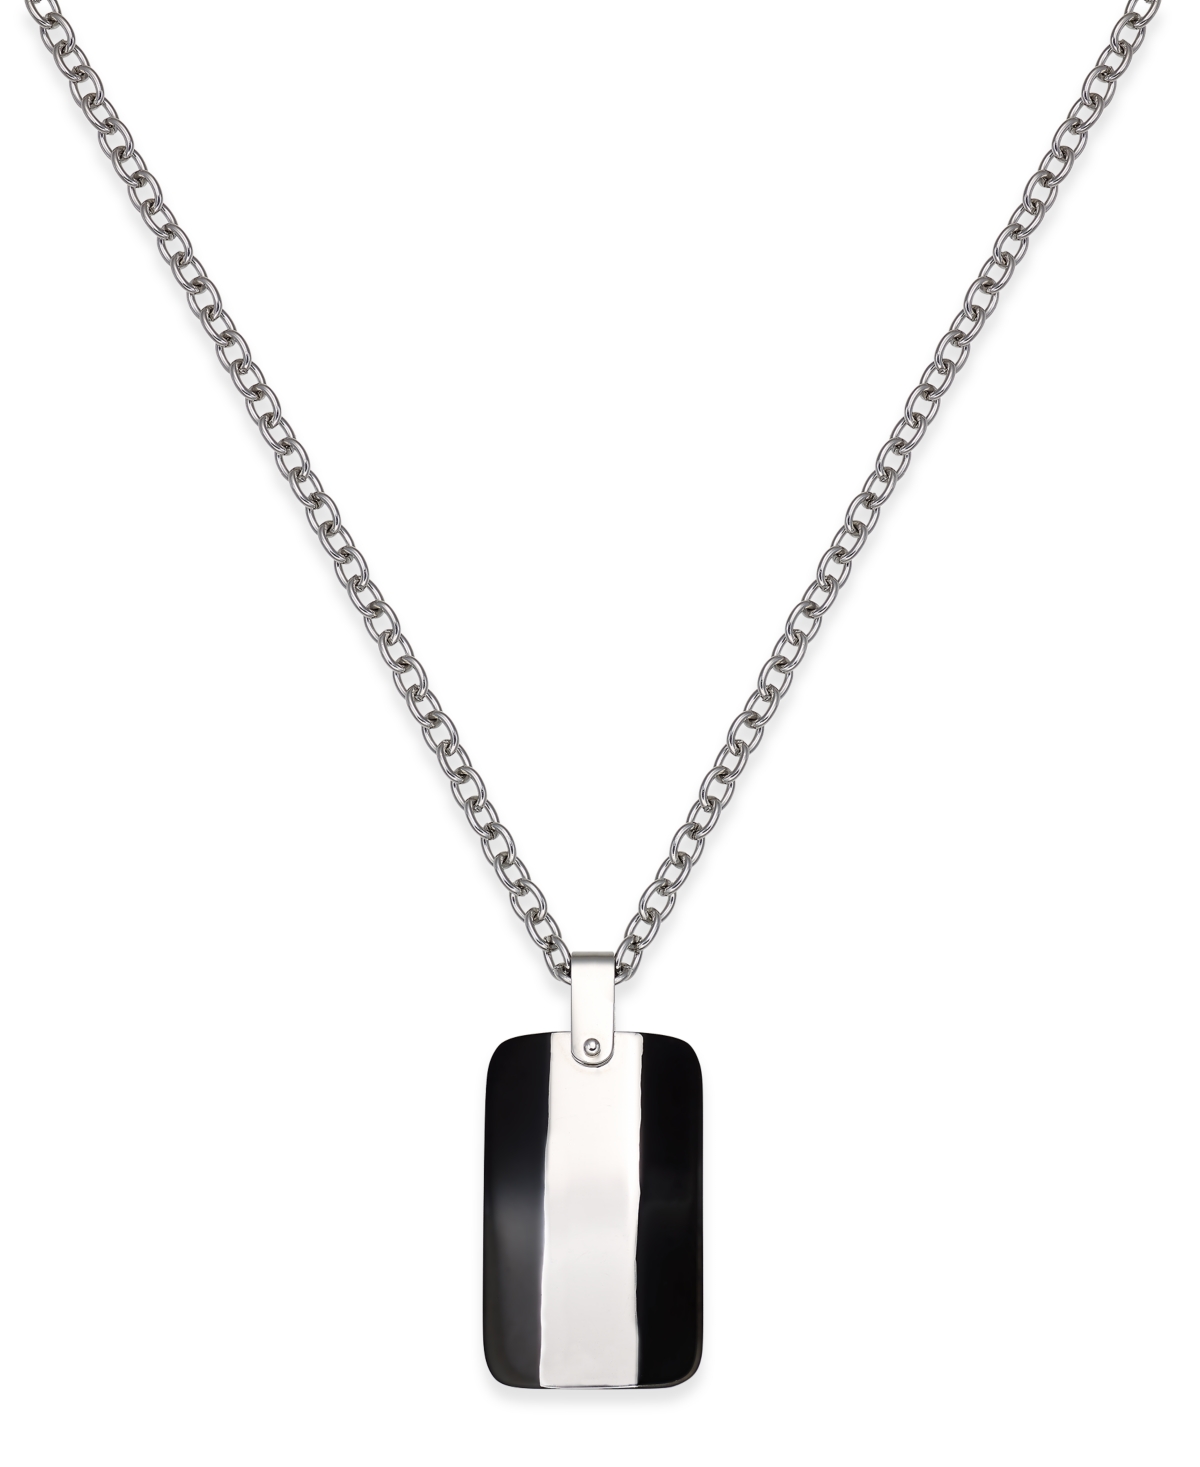 Men's Two-Tone Stainless Steel Dog Tag Pendant Necklace - Silver